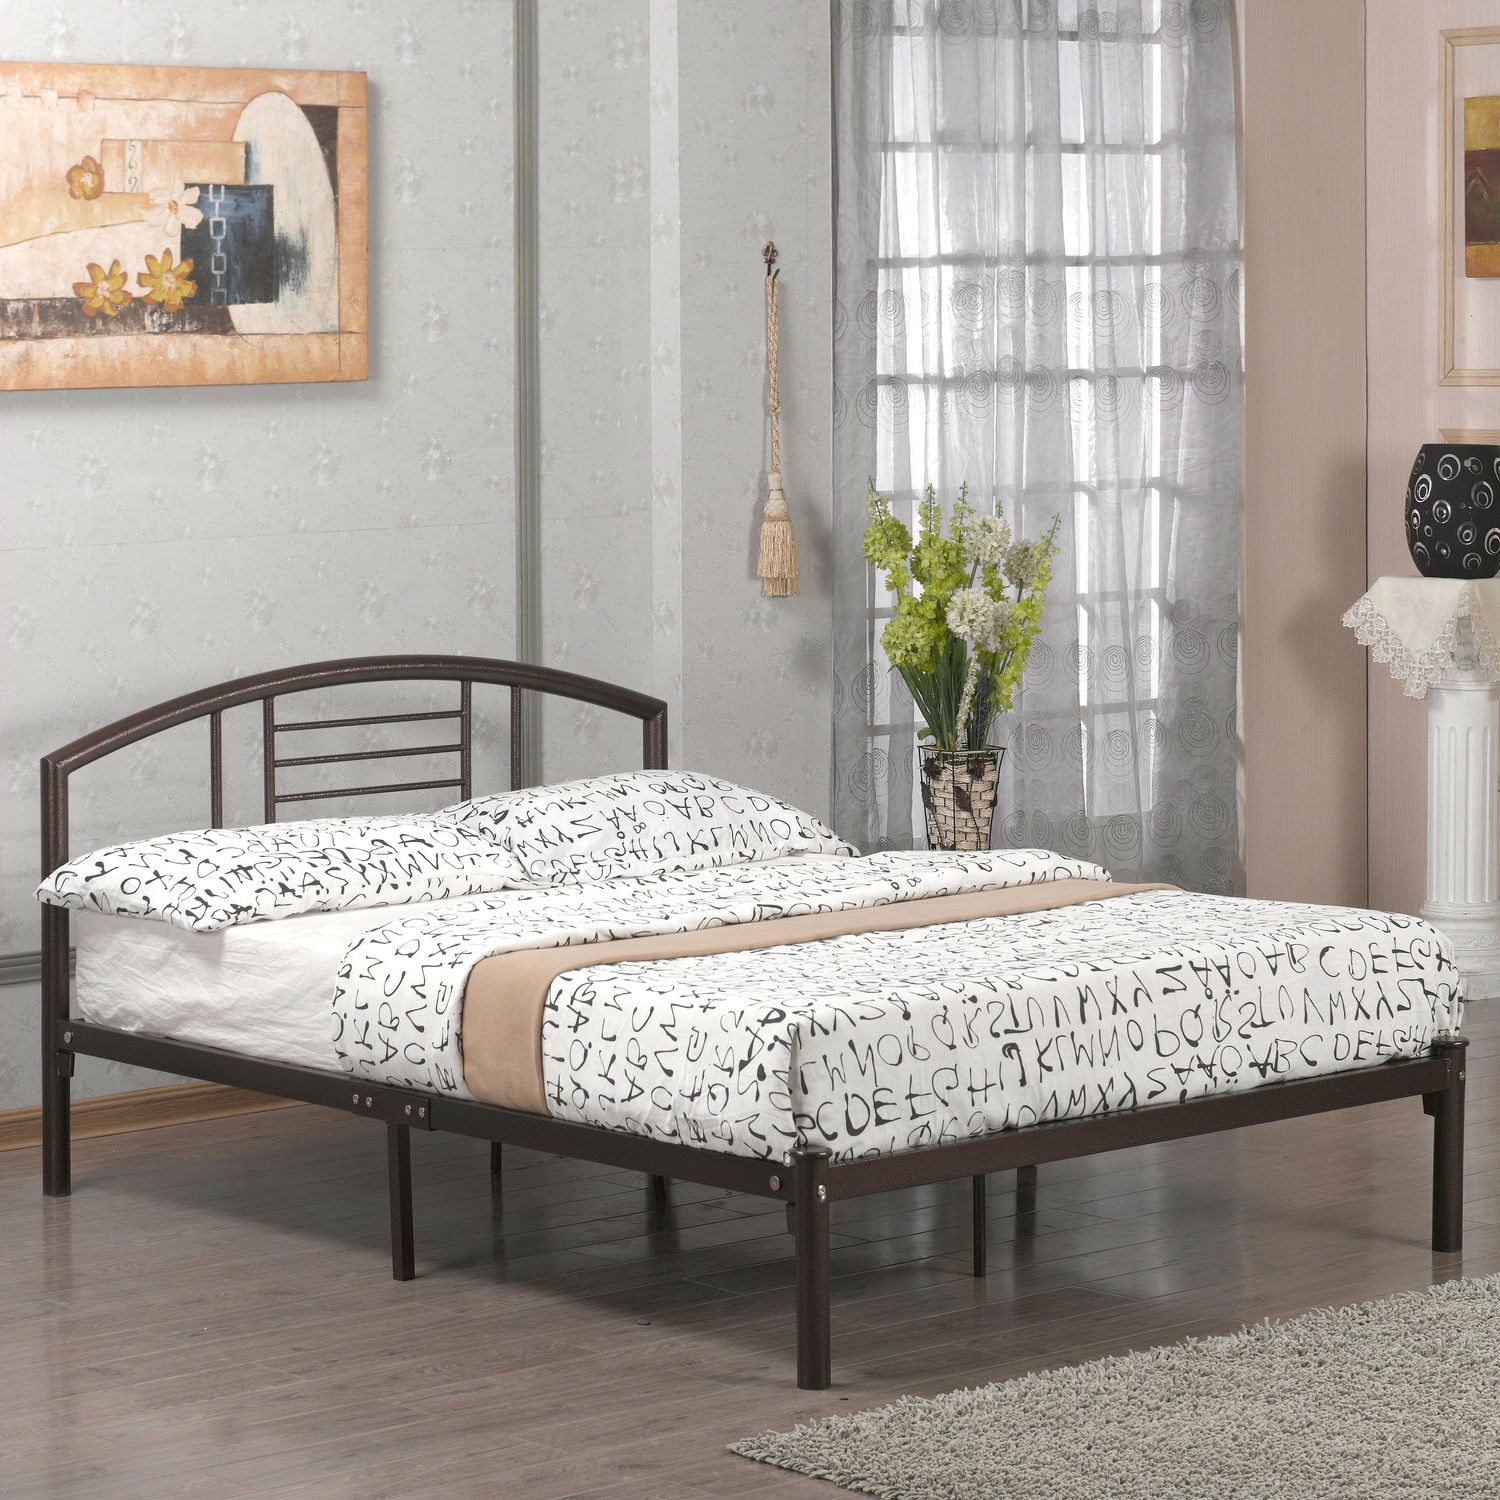 Queen size Contemporary Metal Platform Bed Frame with Headboard in Bronze Finish